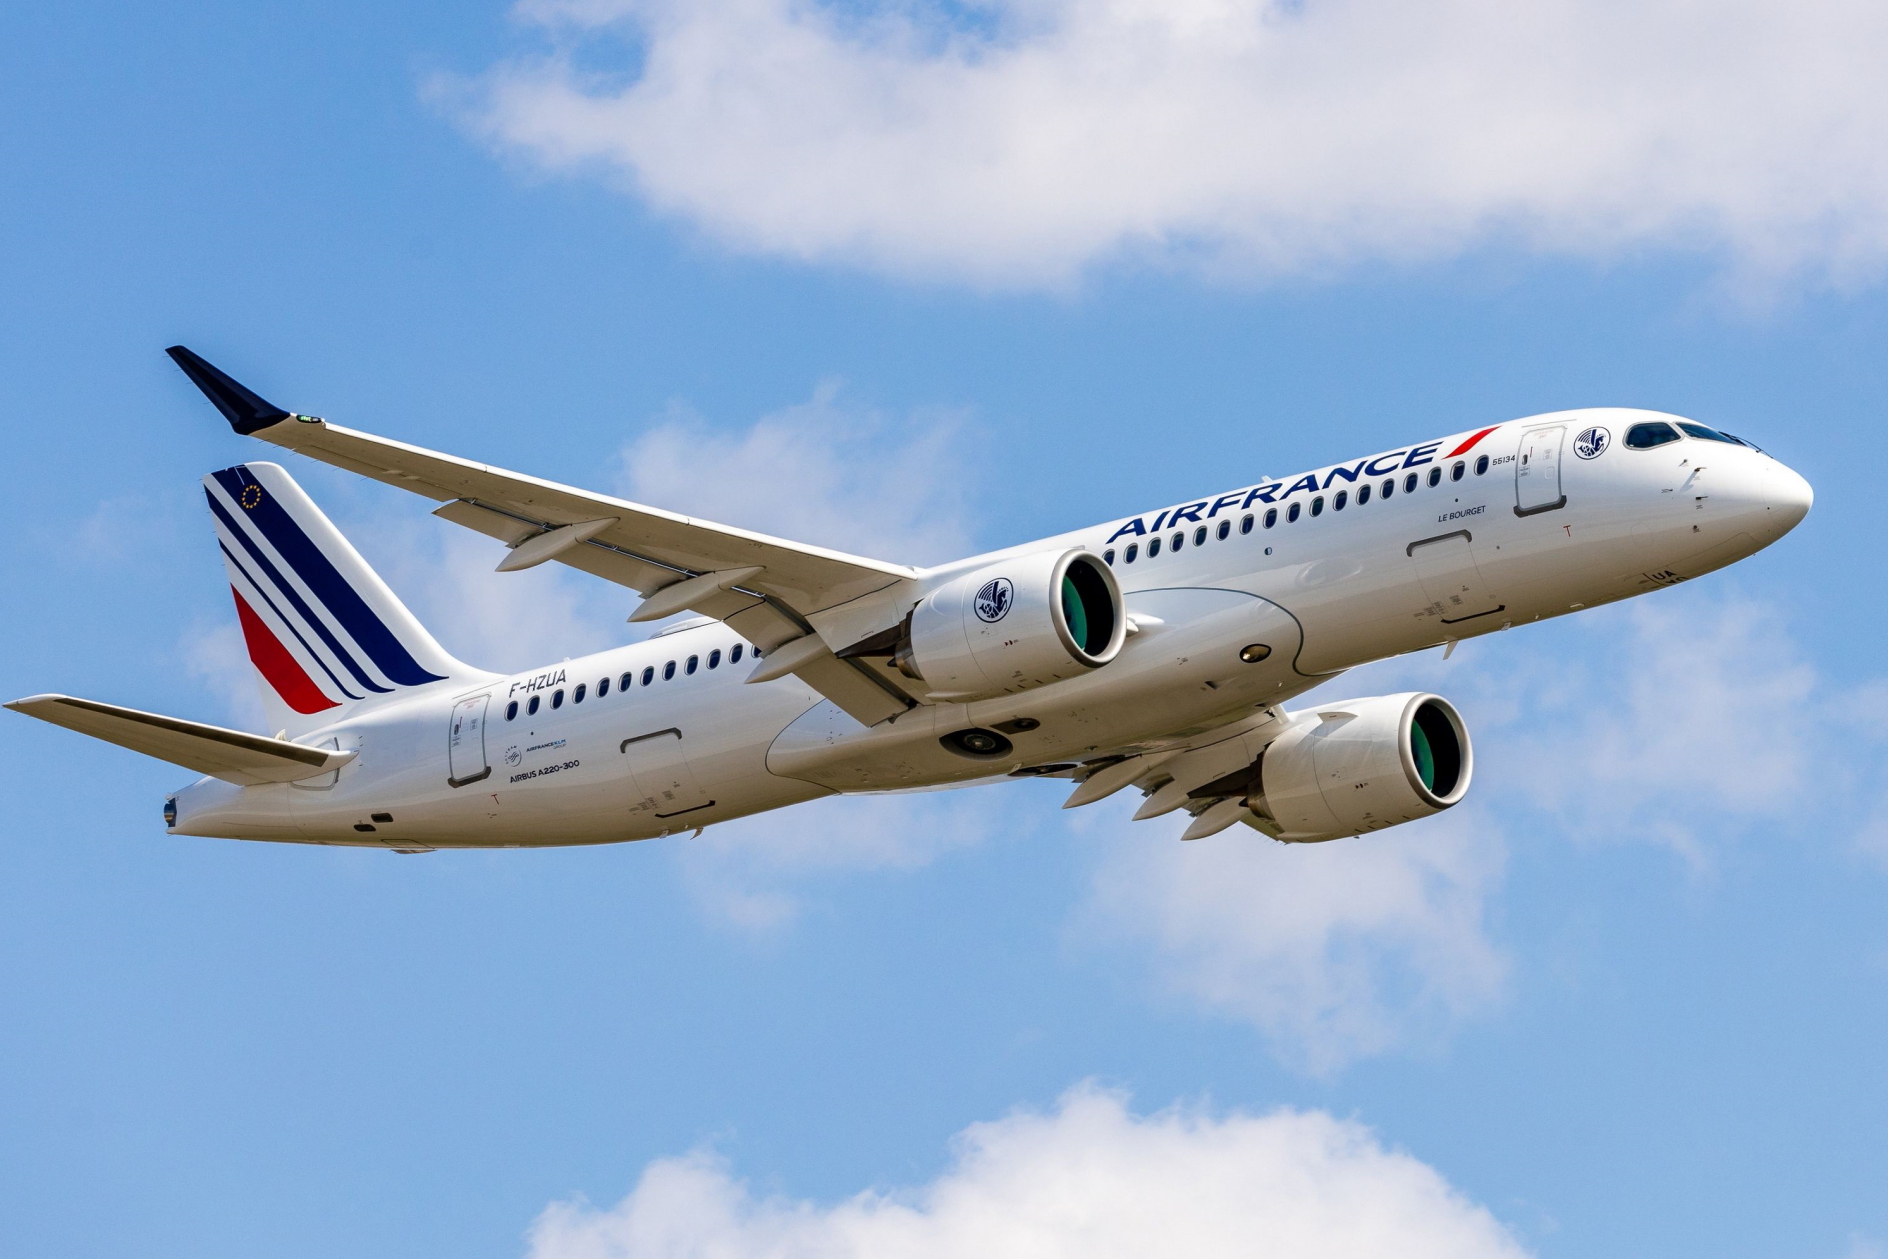 Air France Airbus A220-300. Click to enlarge.